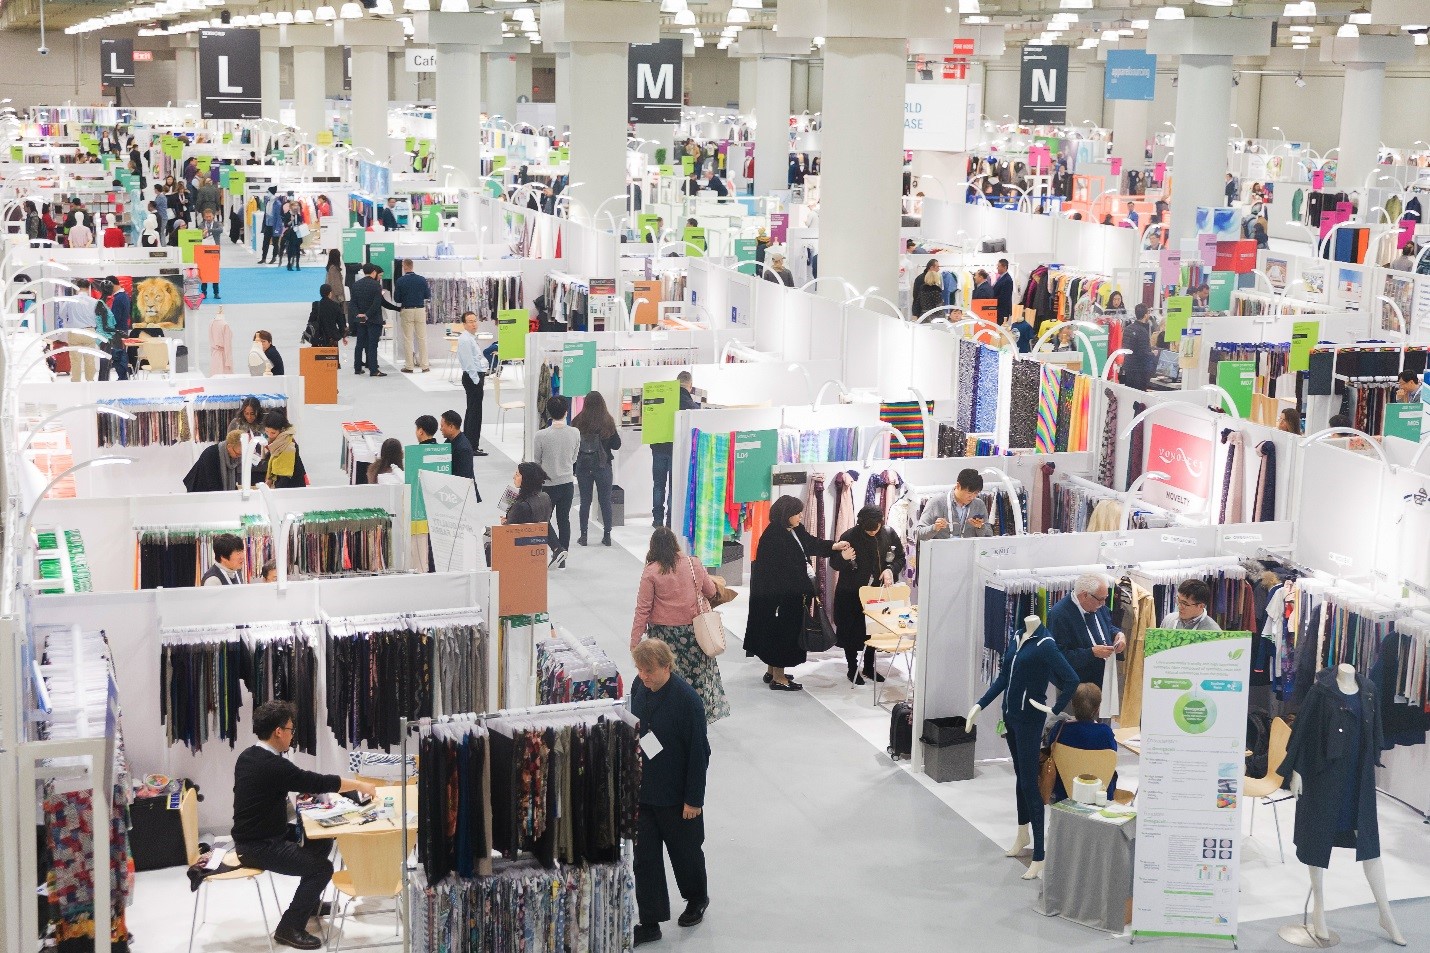 Texworld USA returns to the Javits Convention Center January 21-23, 2019 with a wide variety of exhibitors from around the world. Show highlights include new educational sessions, focus on sustainability, trend showcase that previews Spring/Summer 2019 color and textures